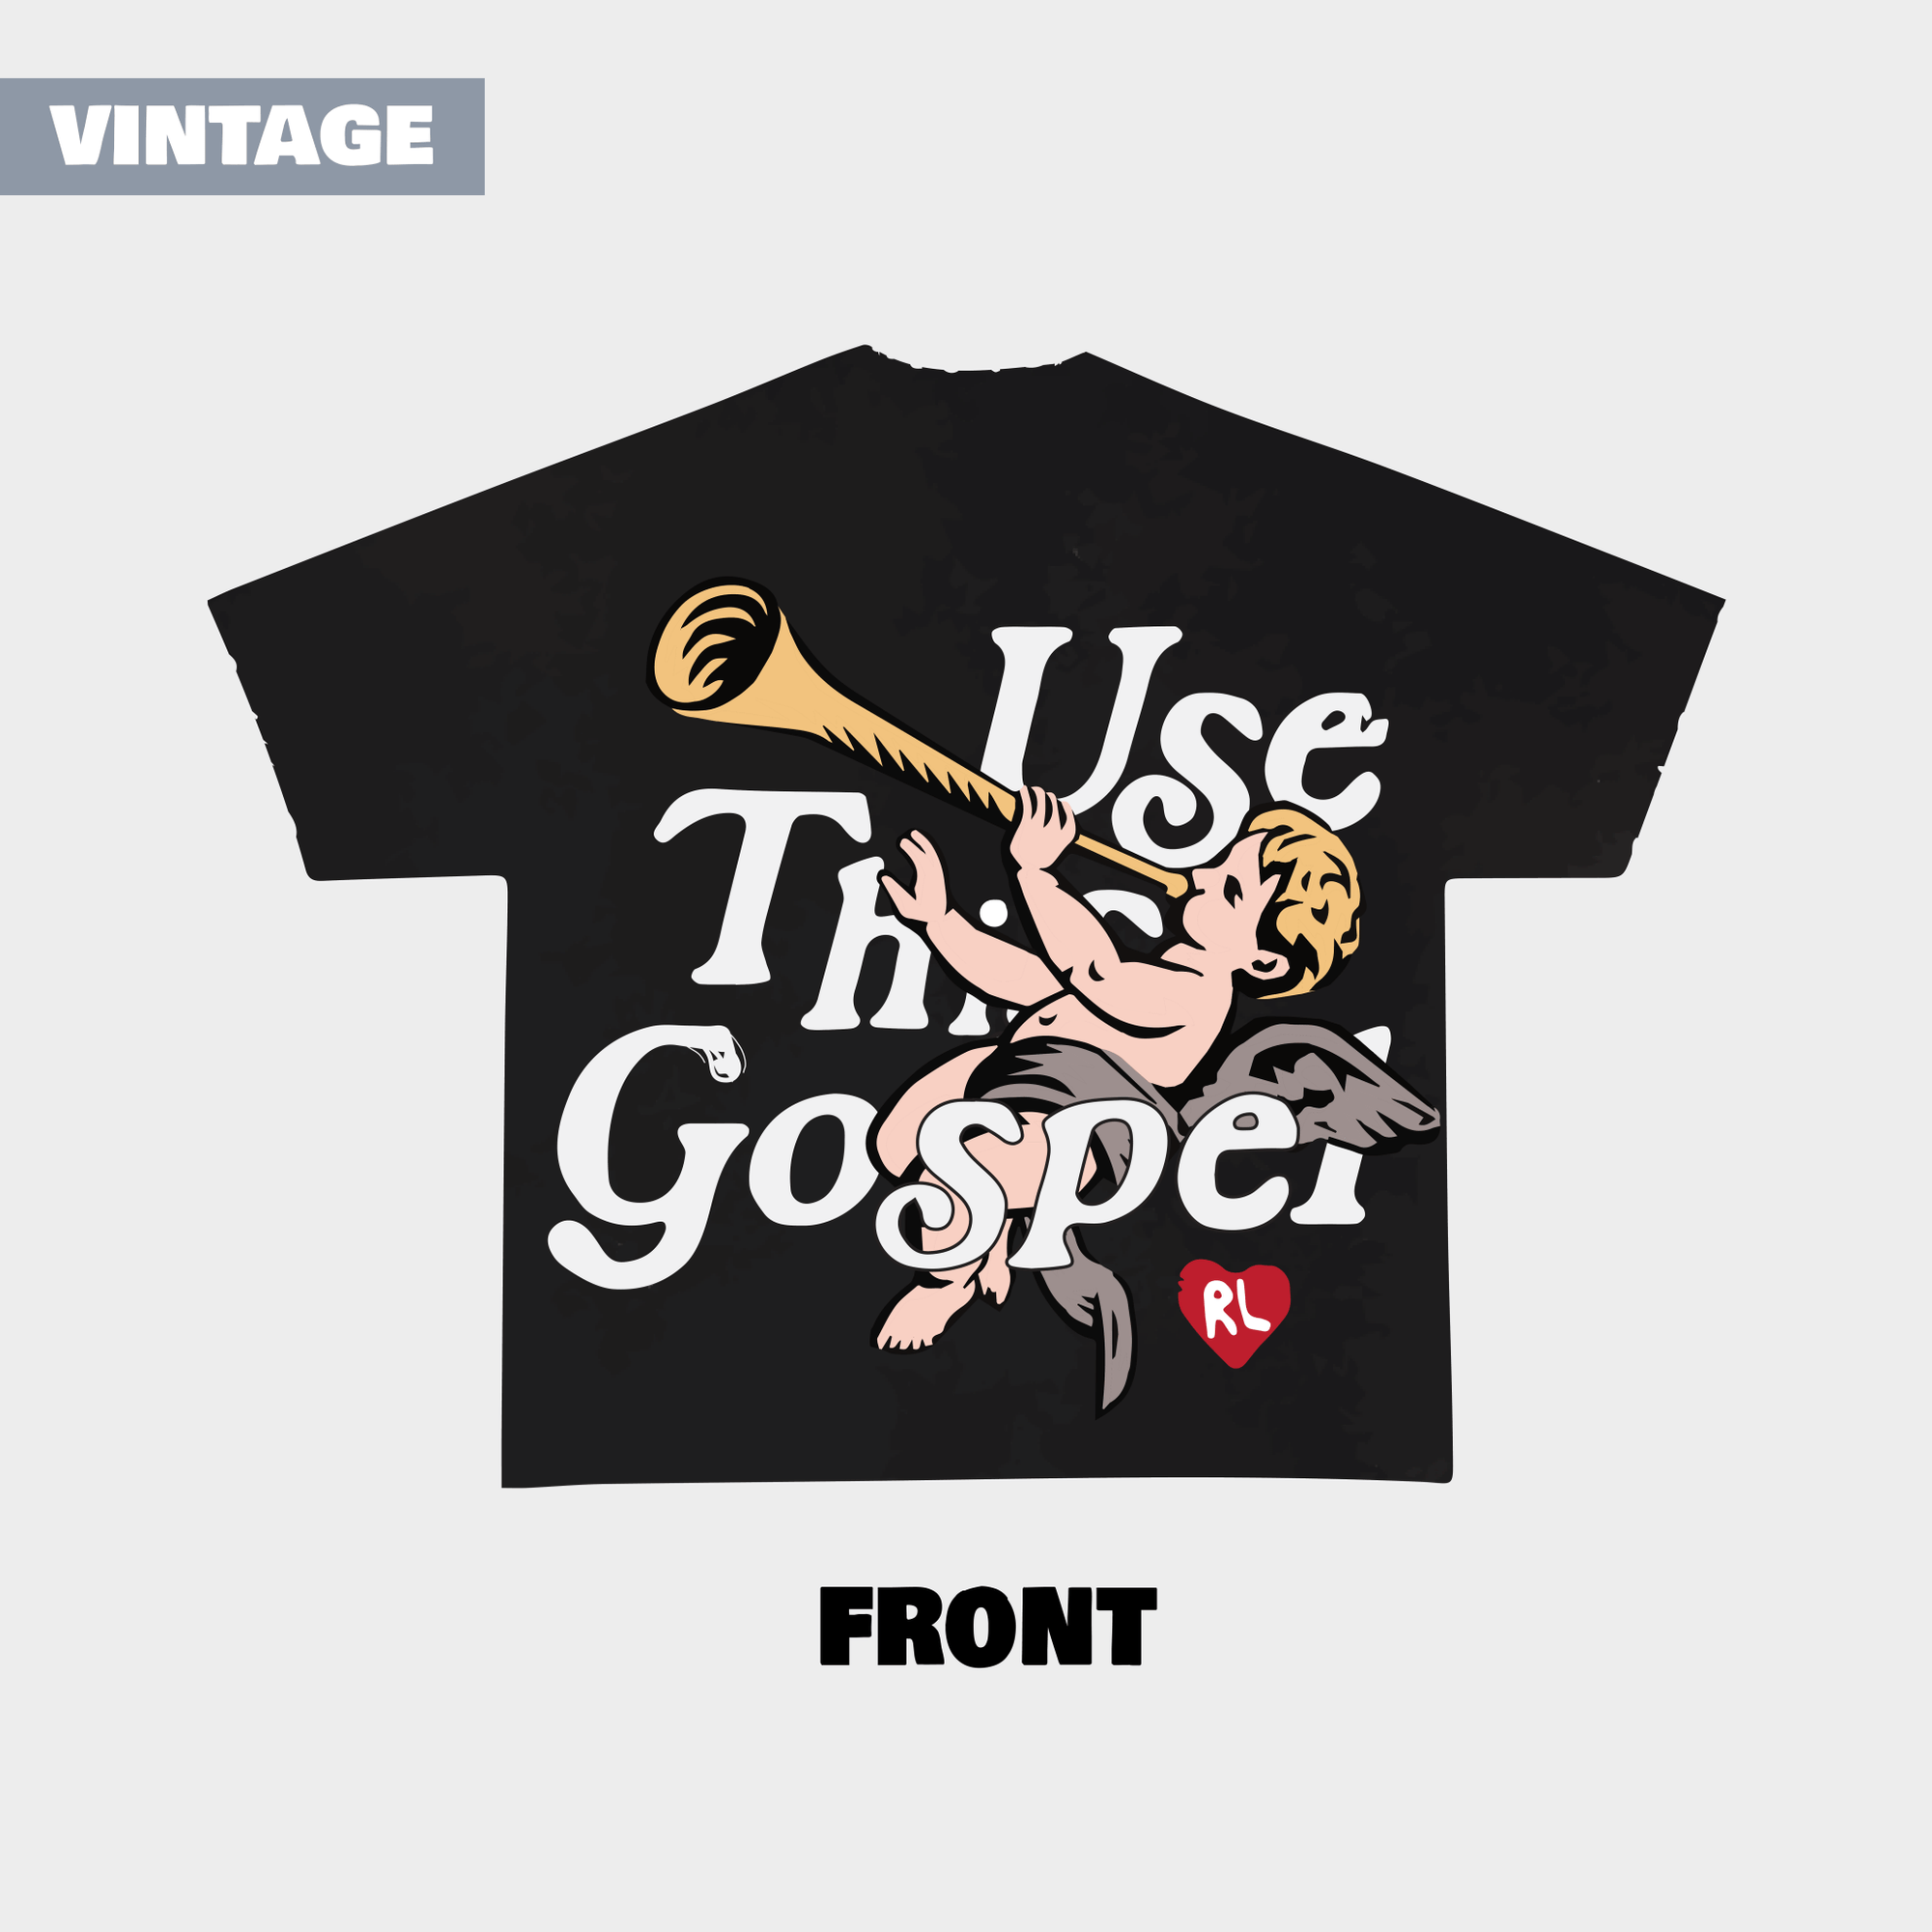 "Use This Gospel" Vintage Tee - RED LETTERS